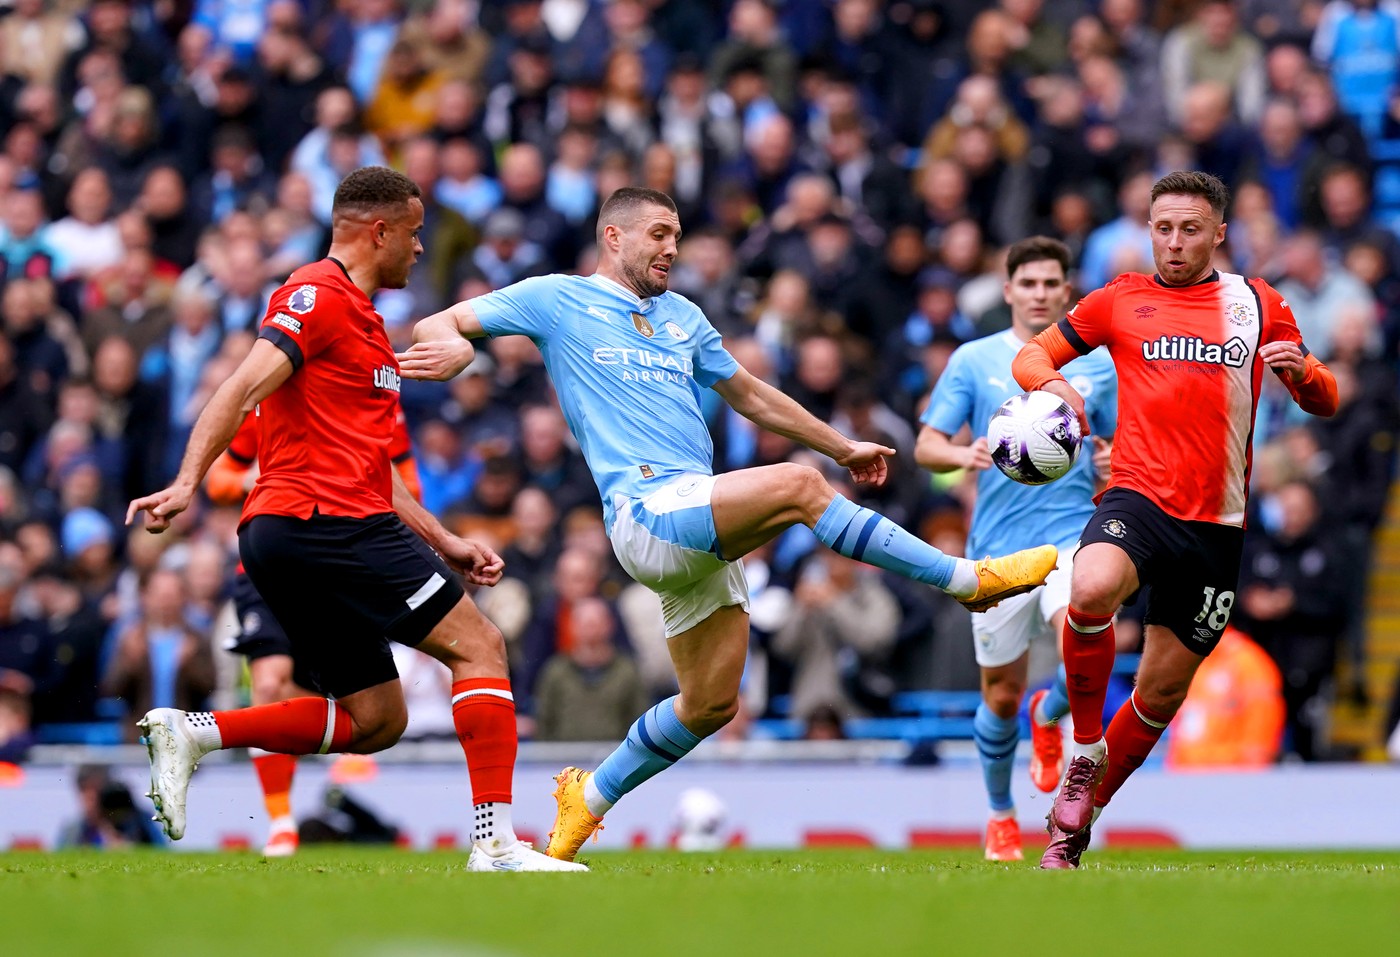 Manchester City's Mateo Kovacic (centre) battles for the ball with Luton Town's Carlton Morris (left) and Jordan Clark during the Premier League match at the Etihad Stadium, Manchester. Picture date: Saturday April 13, 2024.,Image: 864500977, License: Rights-managed, Restrictions: EDITORIAL USE ONLY No use with unauthorised audio, video, data, fixture lists, club/league logos or "live" services. Online in-match use limited to 120 images, no video emulation. No use in betting, games or single club/league/player publications., Model Release: no, Credit line: Martin Rickett / PA Images / Profimedia